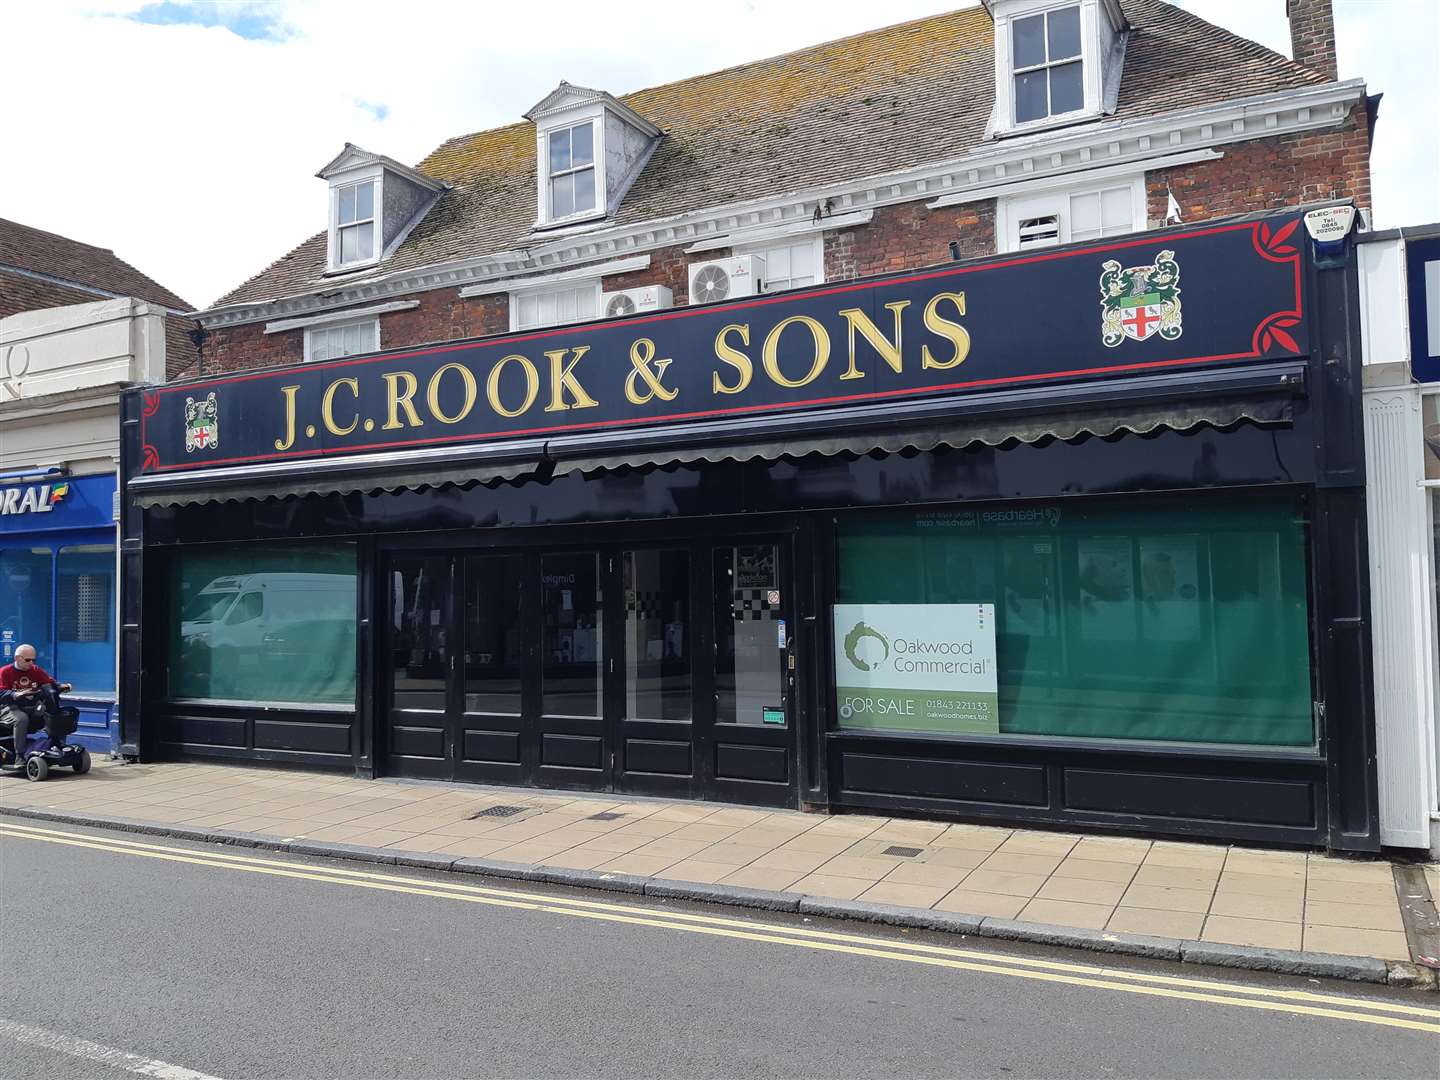 The former J.C. Rook & Sons store in Deal High Street. Picture:Sam Lennon